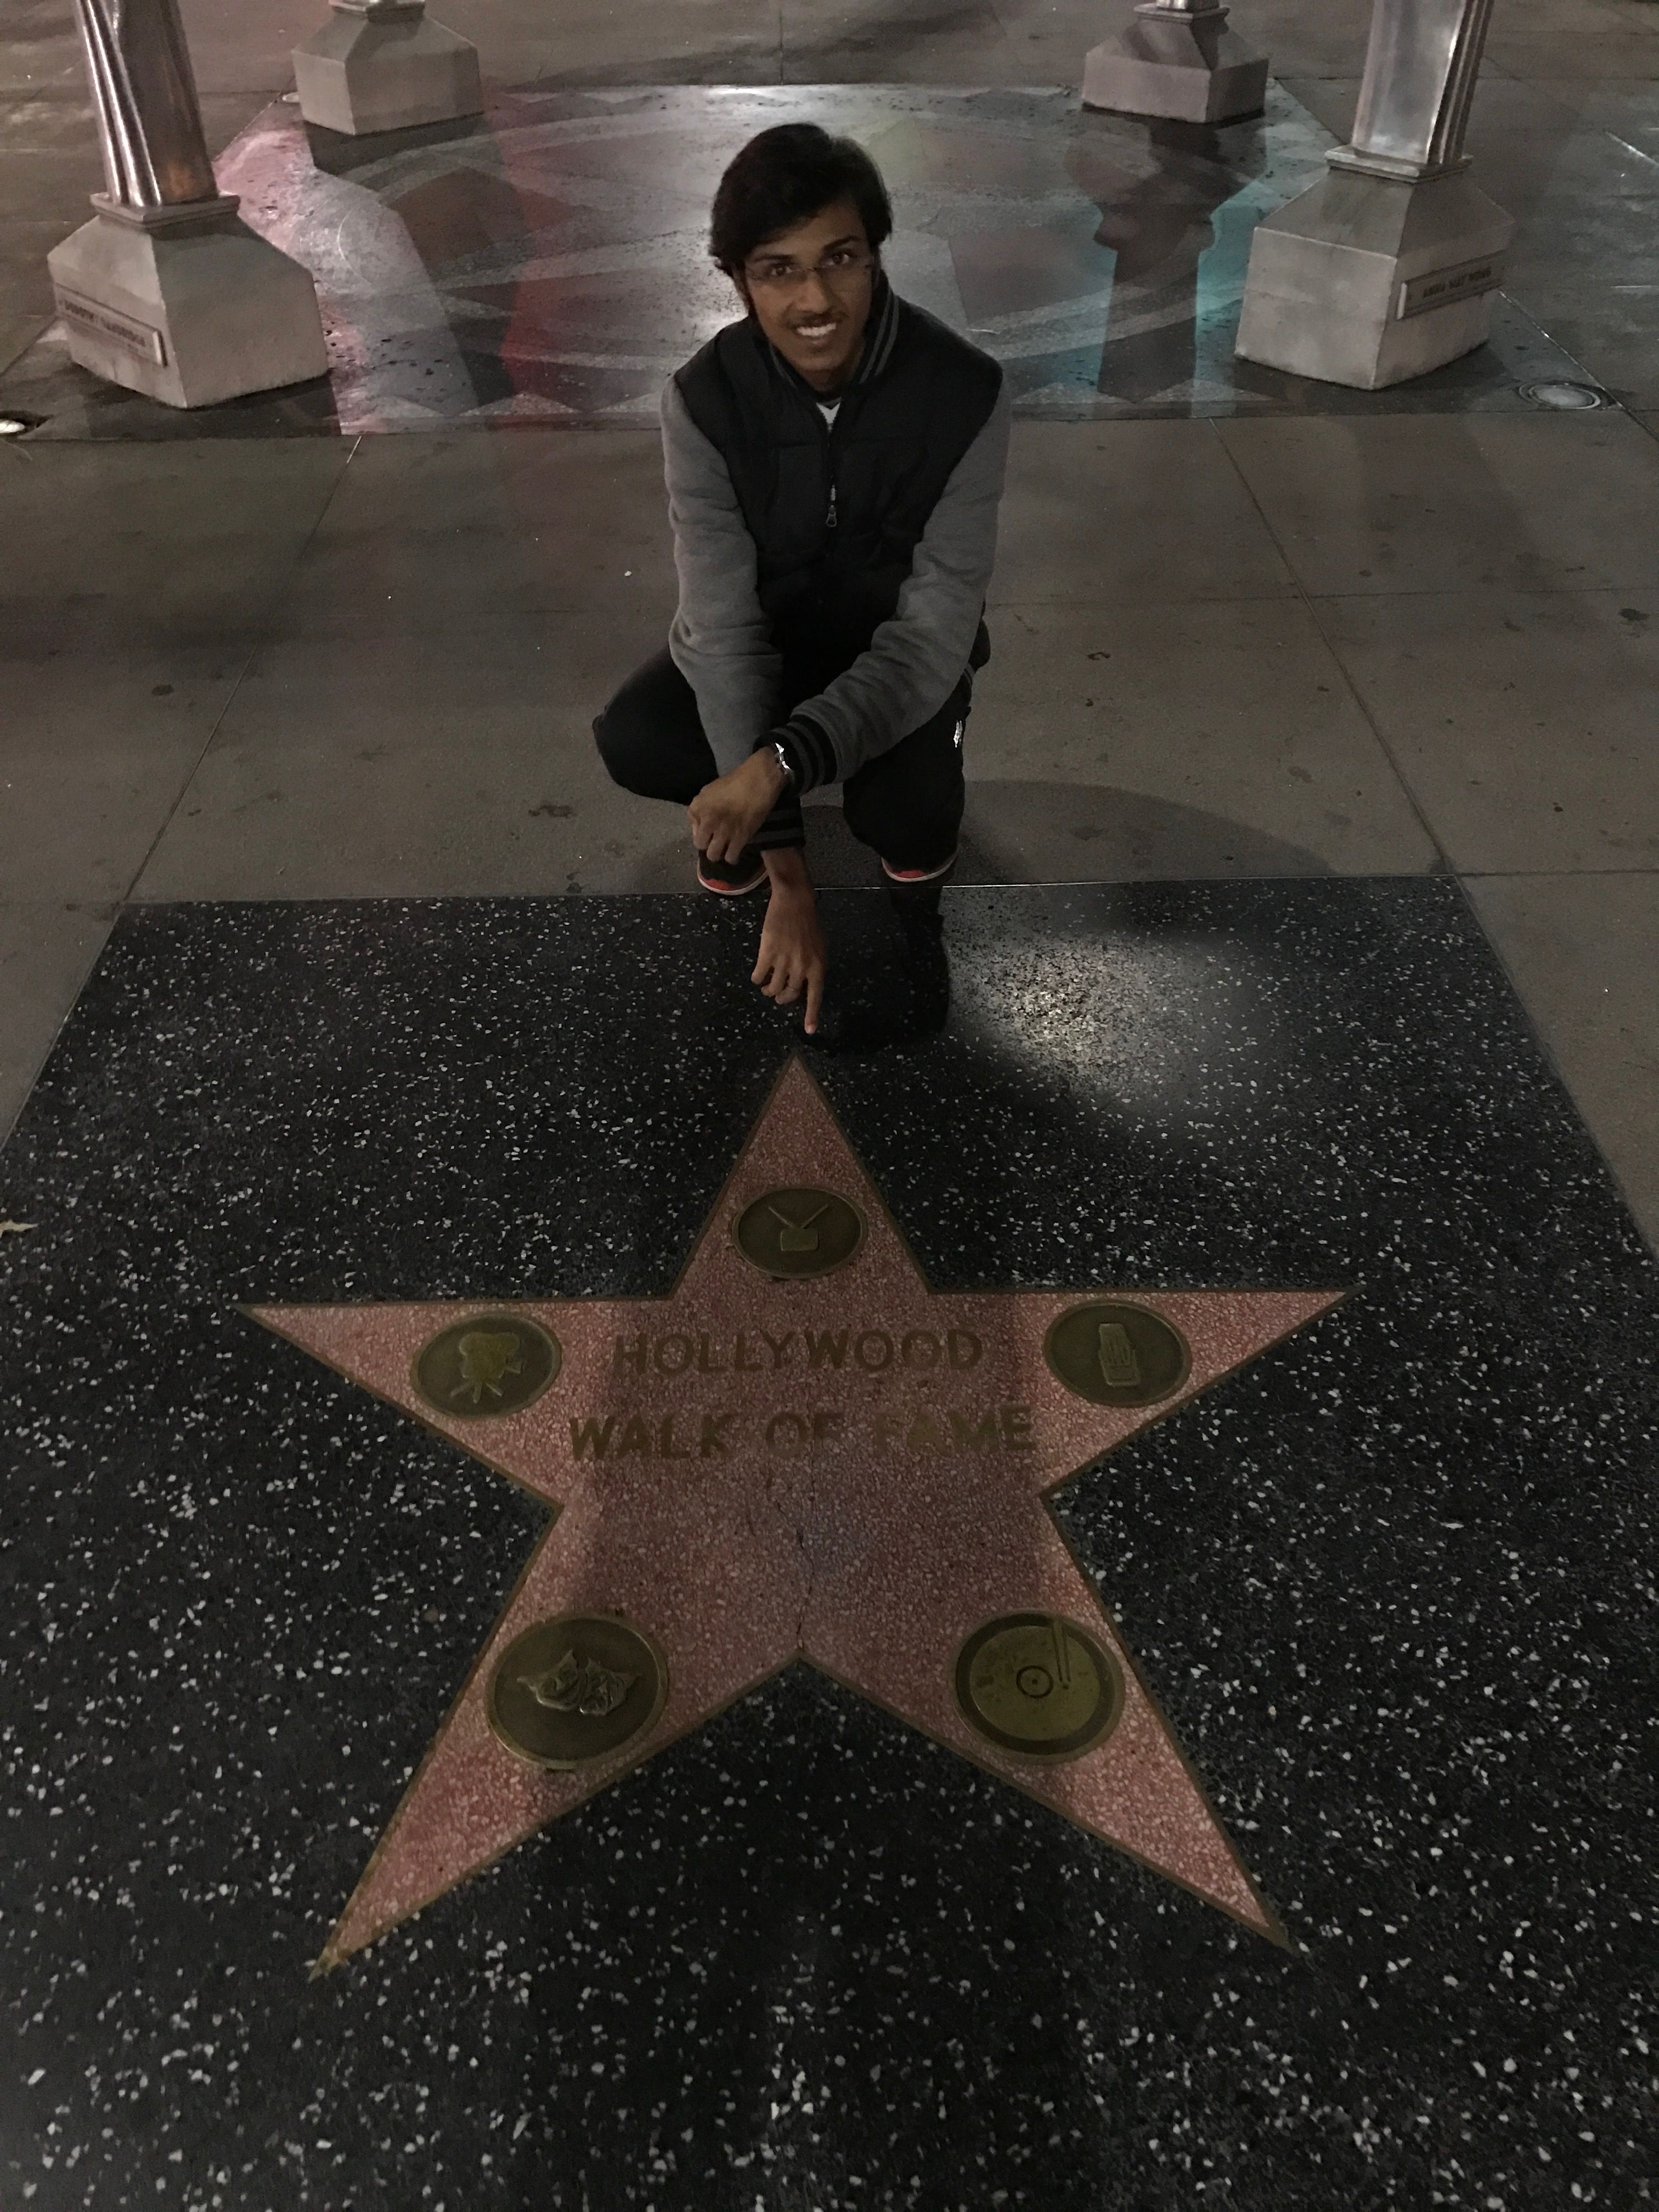 Star of Hollywood Walk of Fame